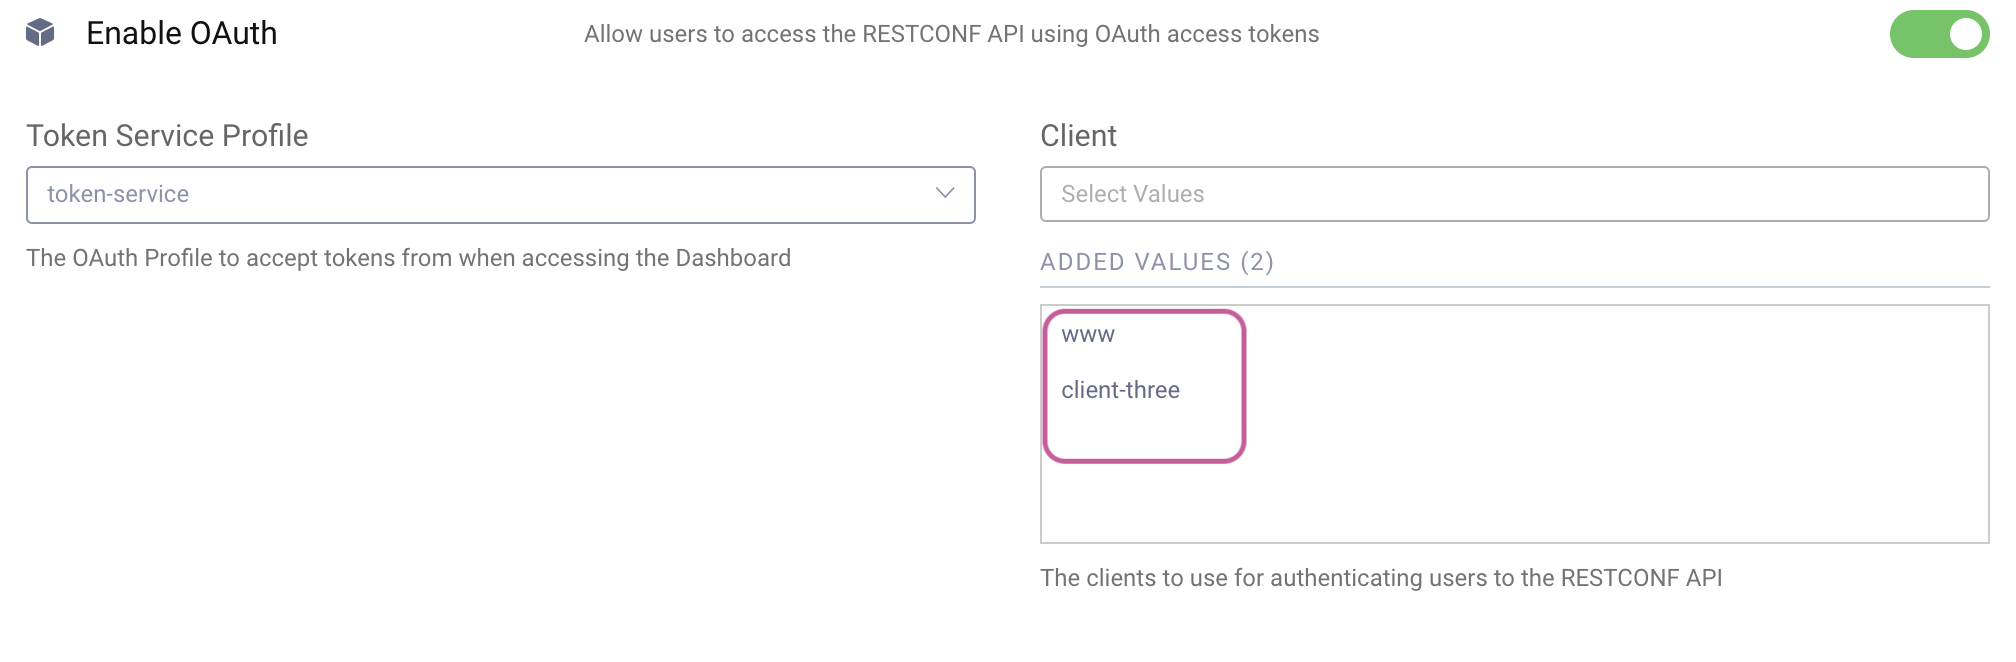 Enable OAuth for RESTCONF